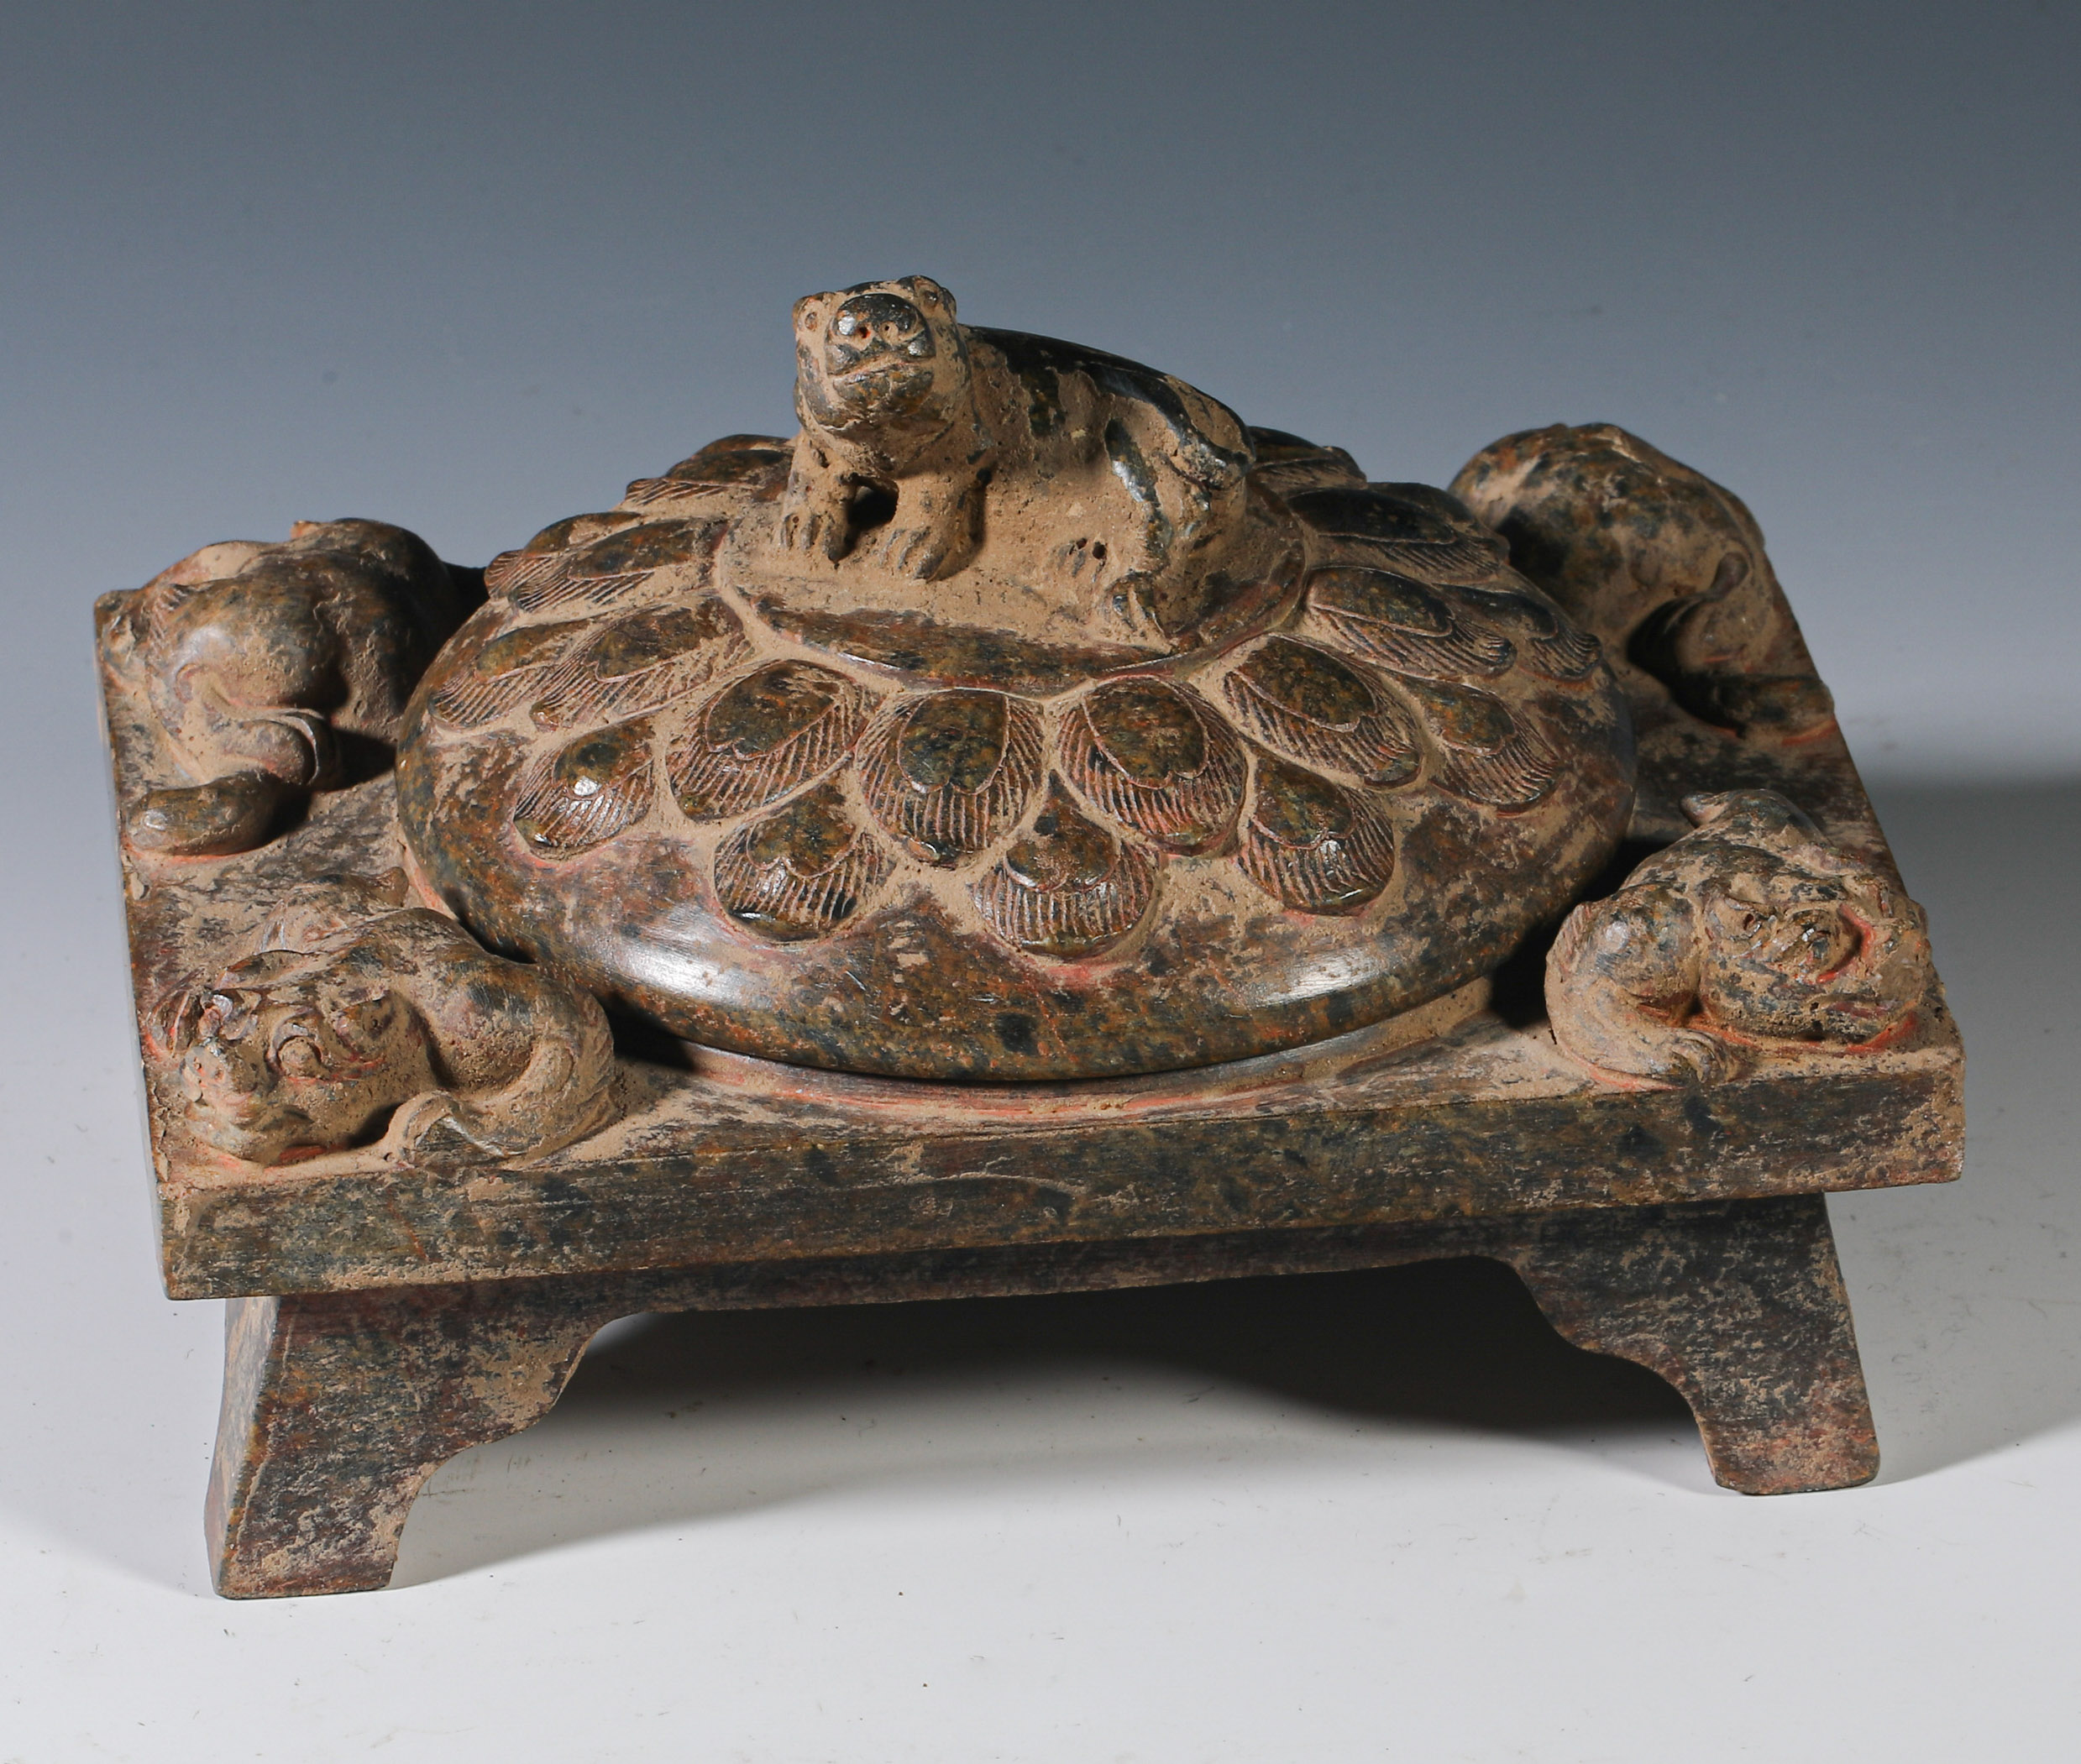 Copper incense burner  from the Han dynasty  - Image 2 of 11